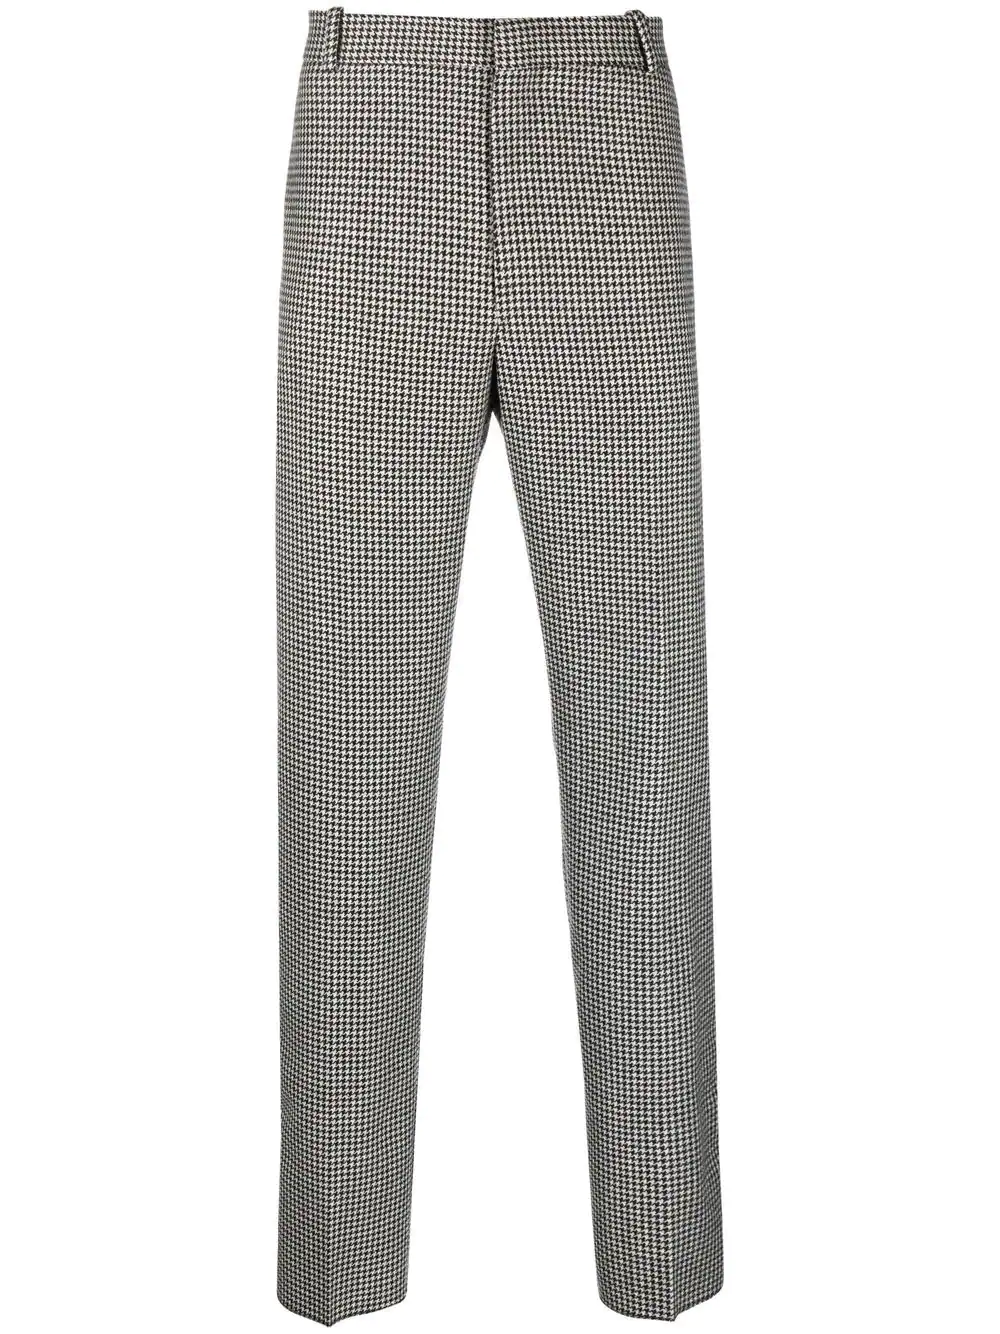 Alexander McQueen houndstooth tapered trousers